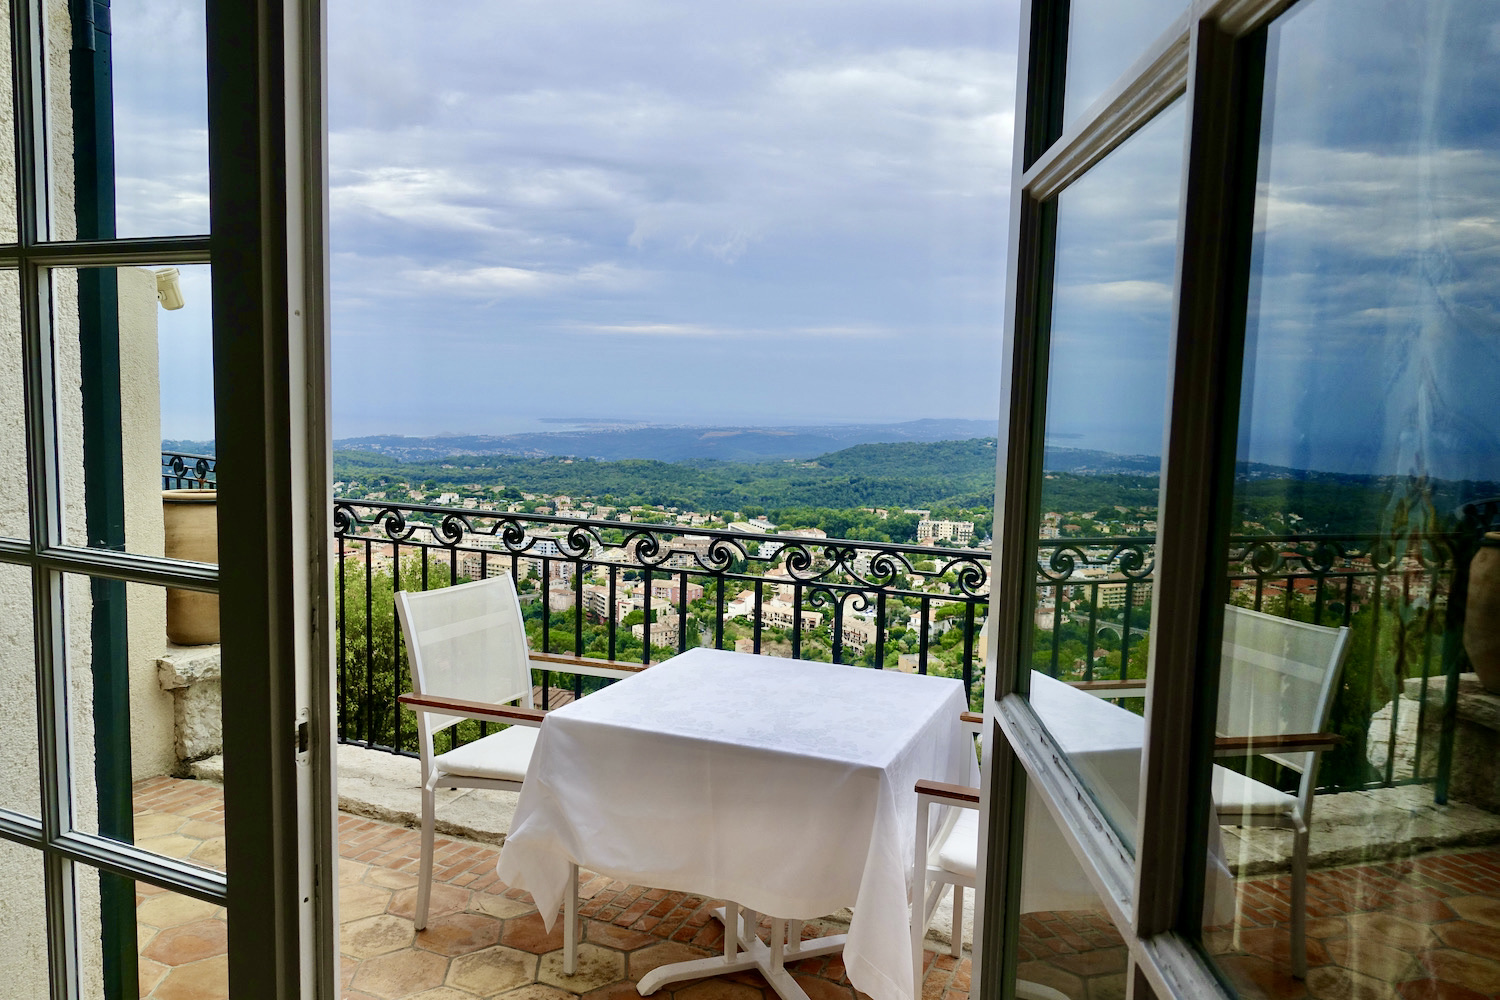 Château Saint-Martin in the French Riviera hills, view from guest room